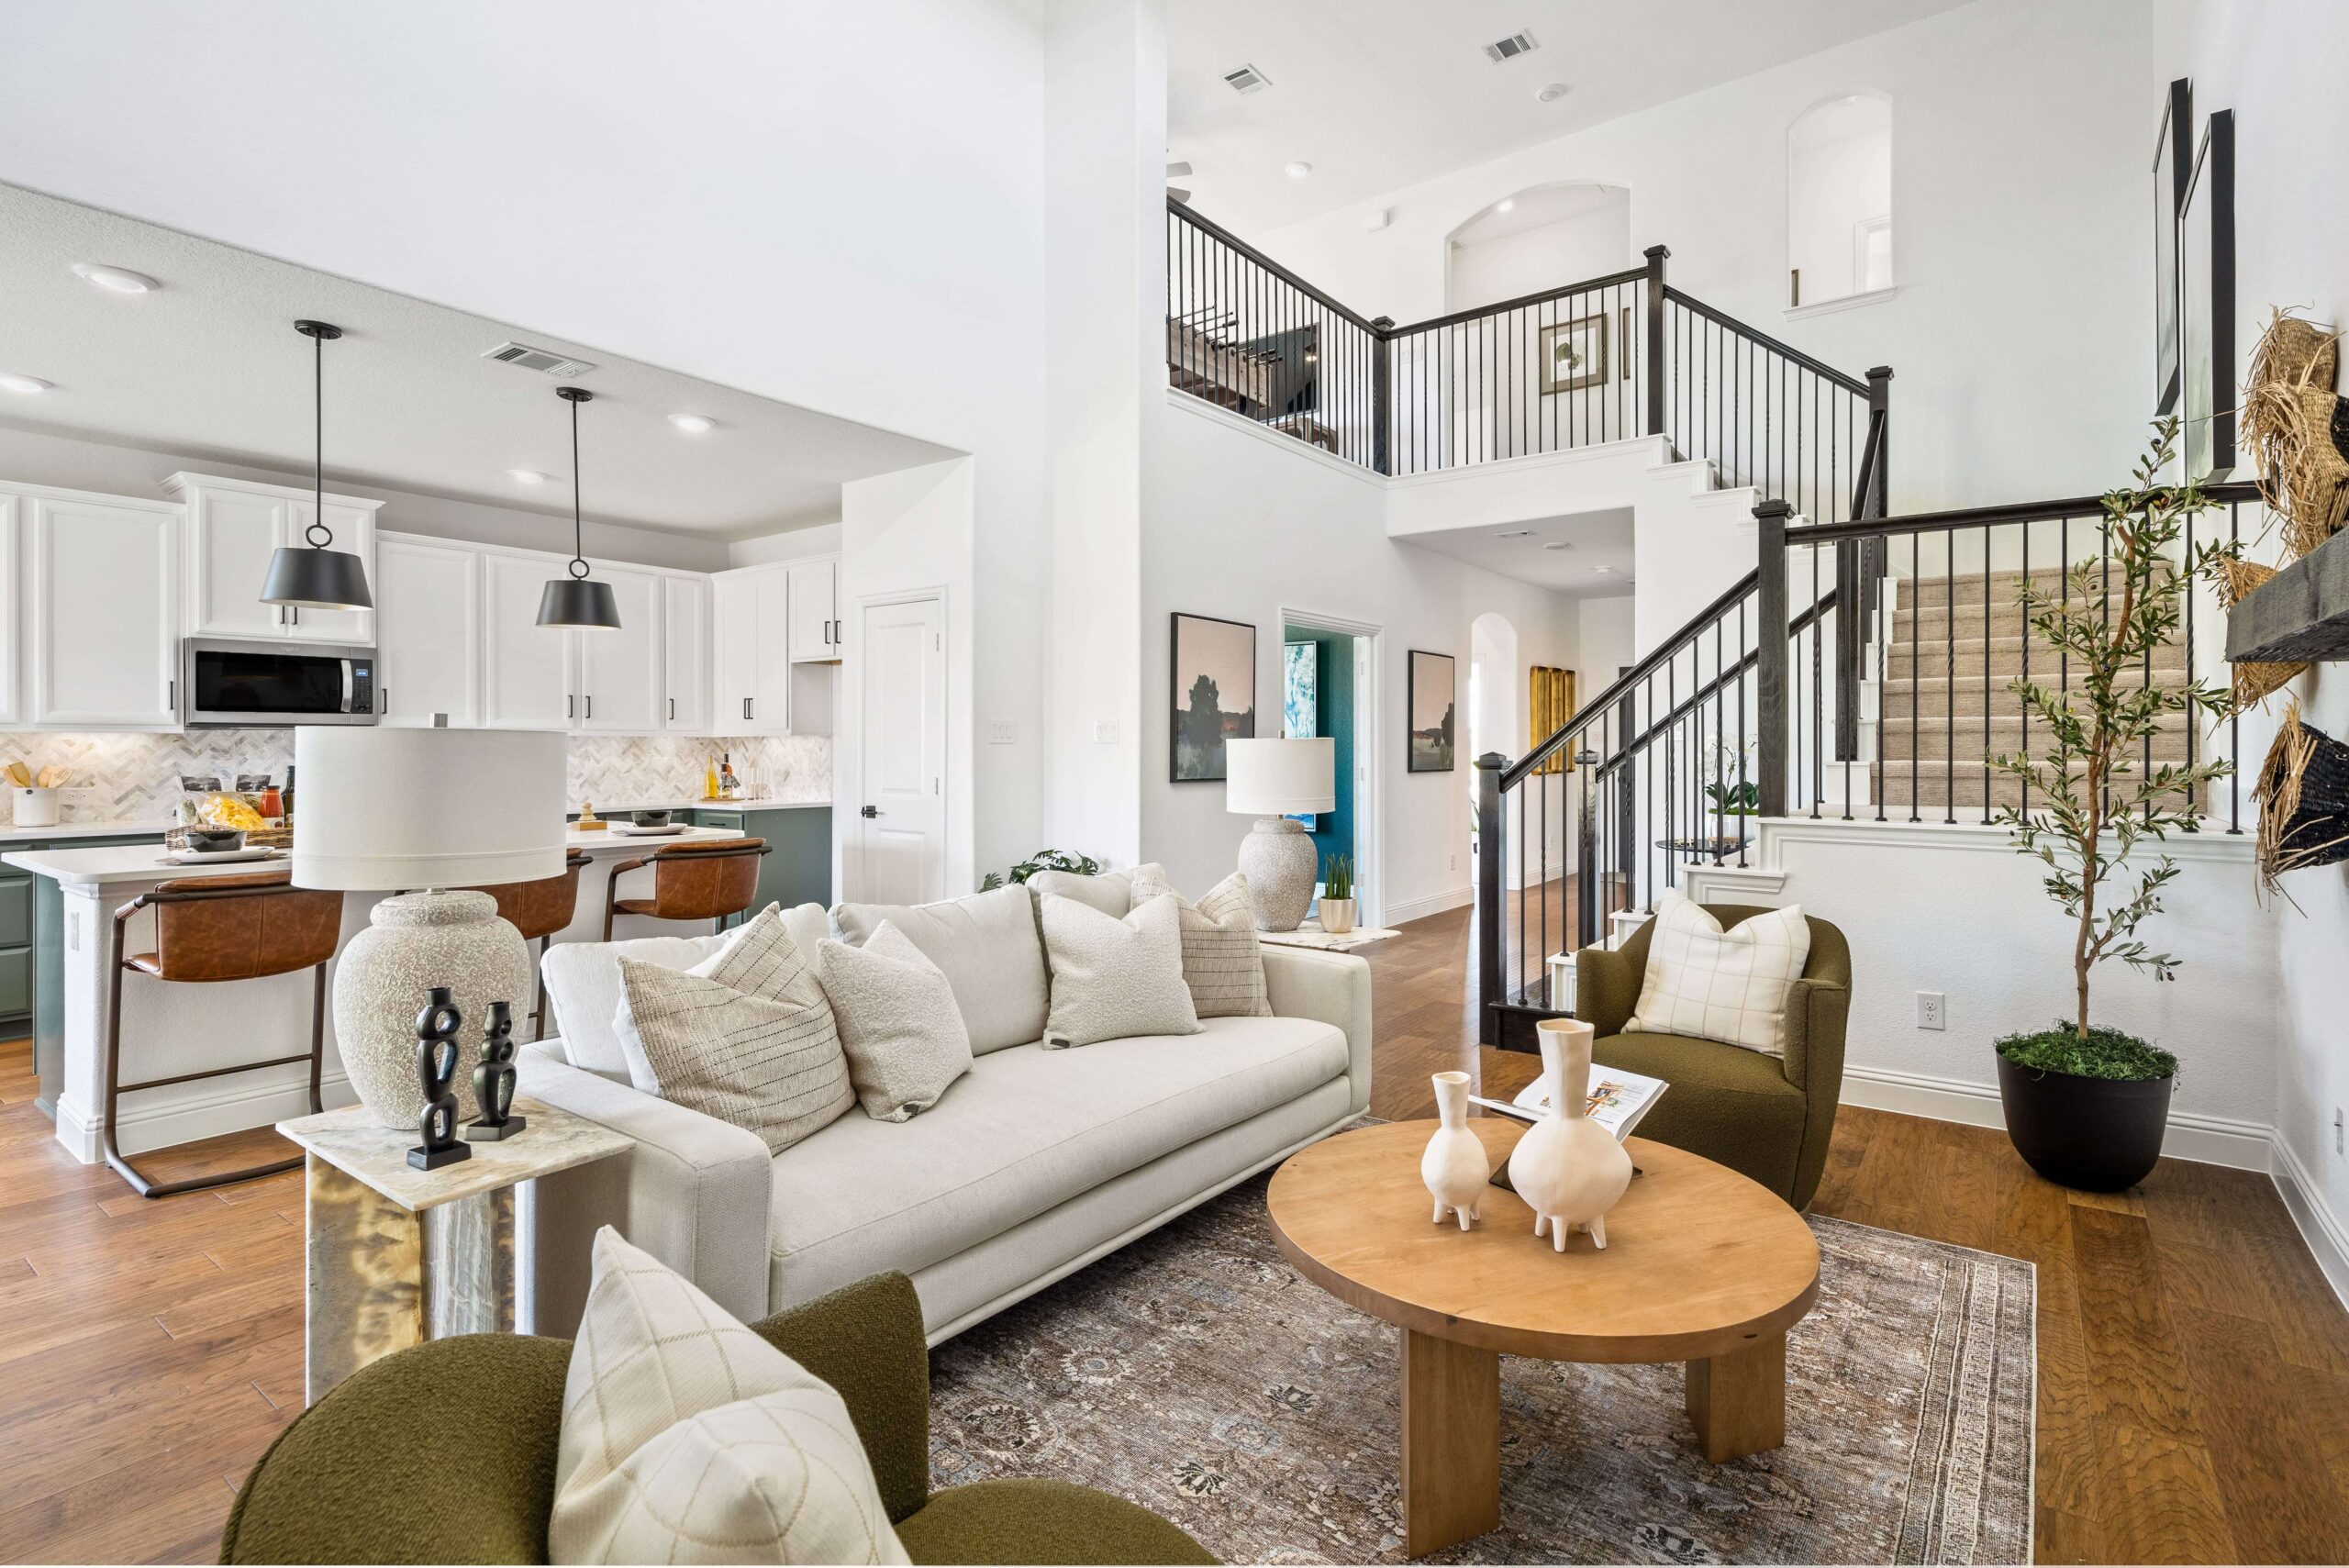 Open-concept living space in new homes in Goodland TX, featuring a living room with a beige sofa and accent chairs, and a kitchen with an island and modern appliances, complemented by bright,